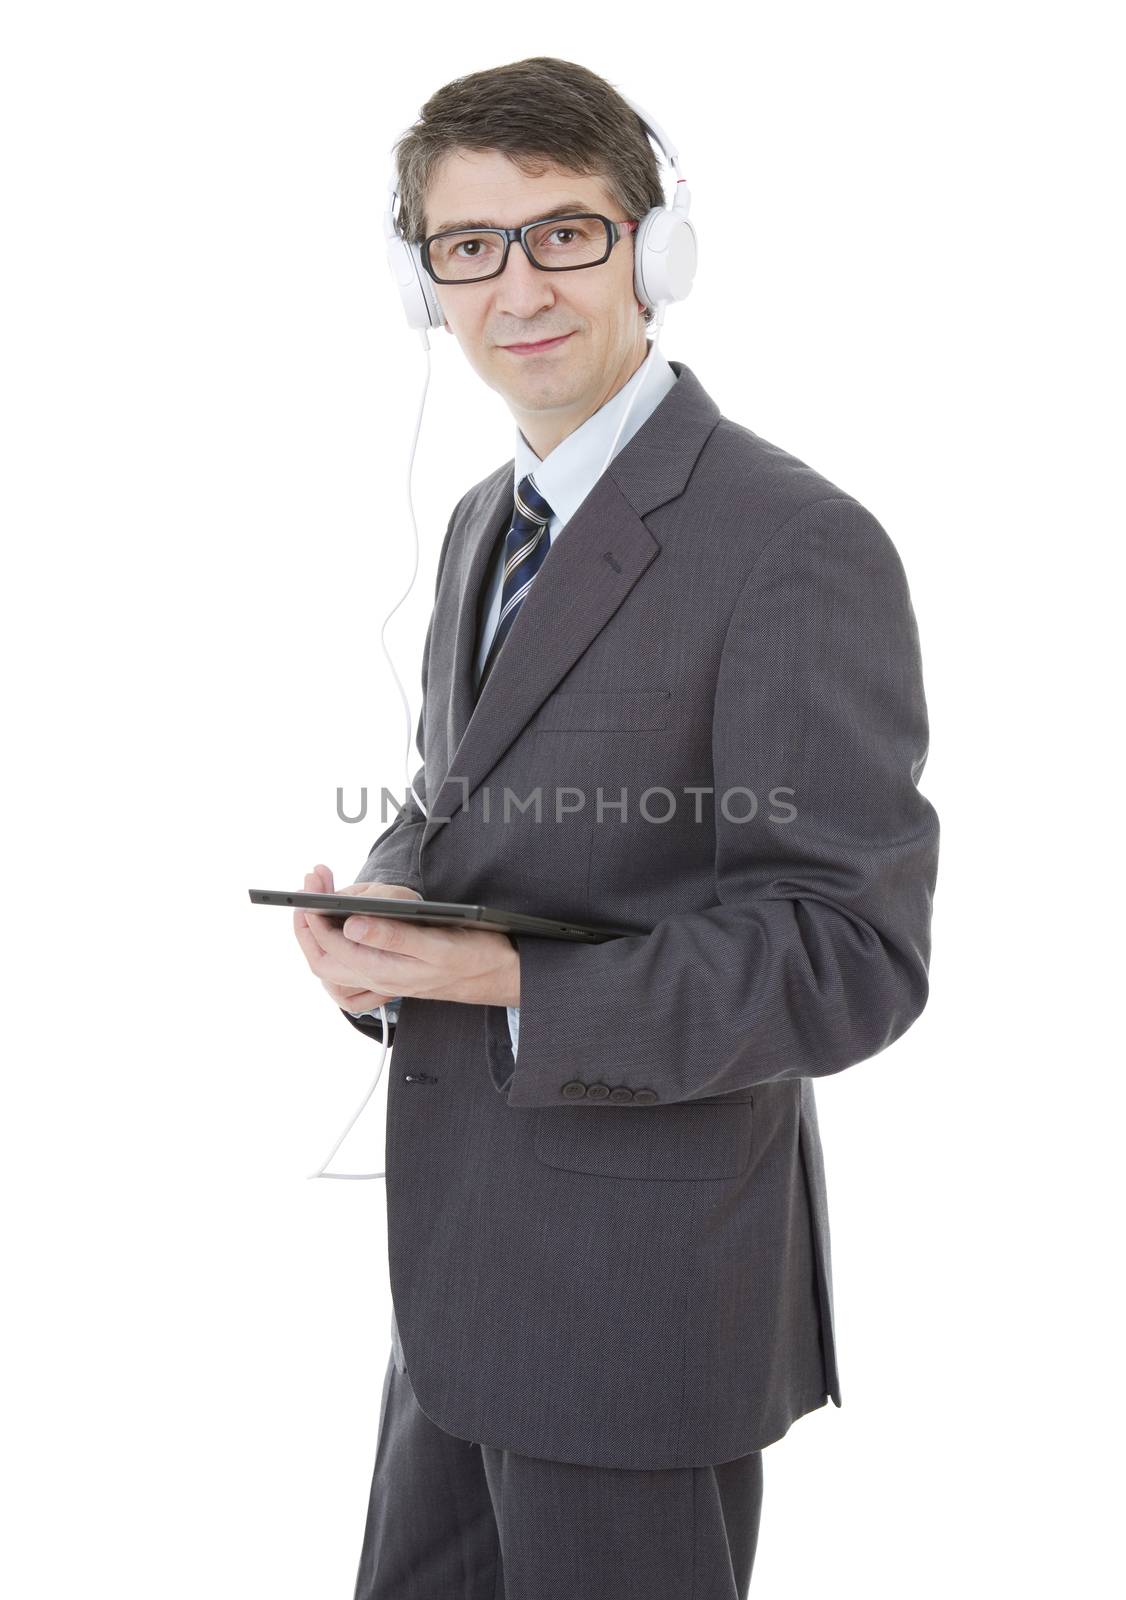 businessman working with tablet pc and headphones, isolated